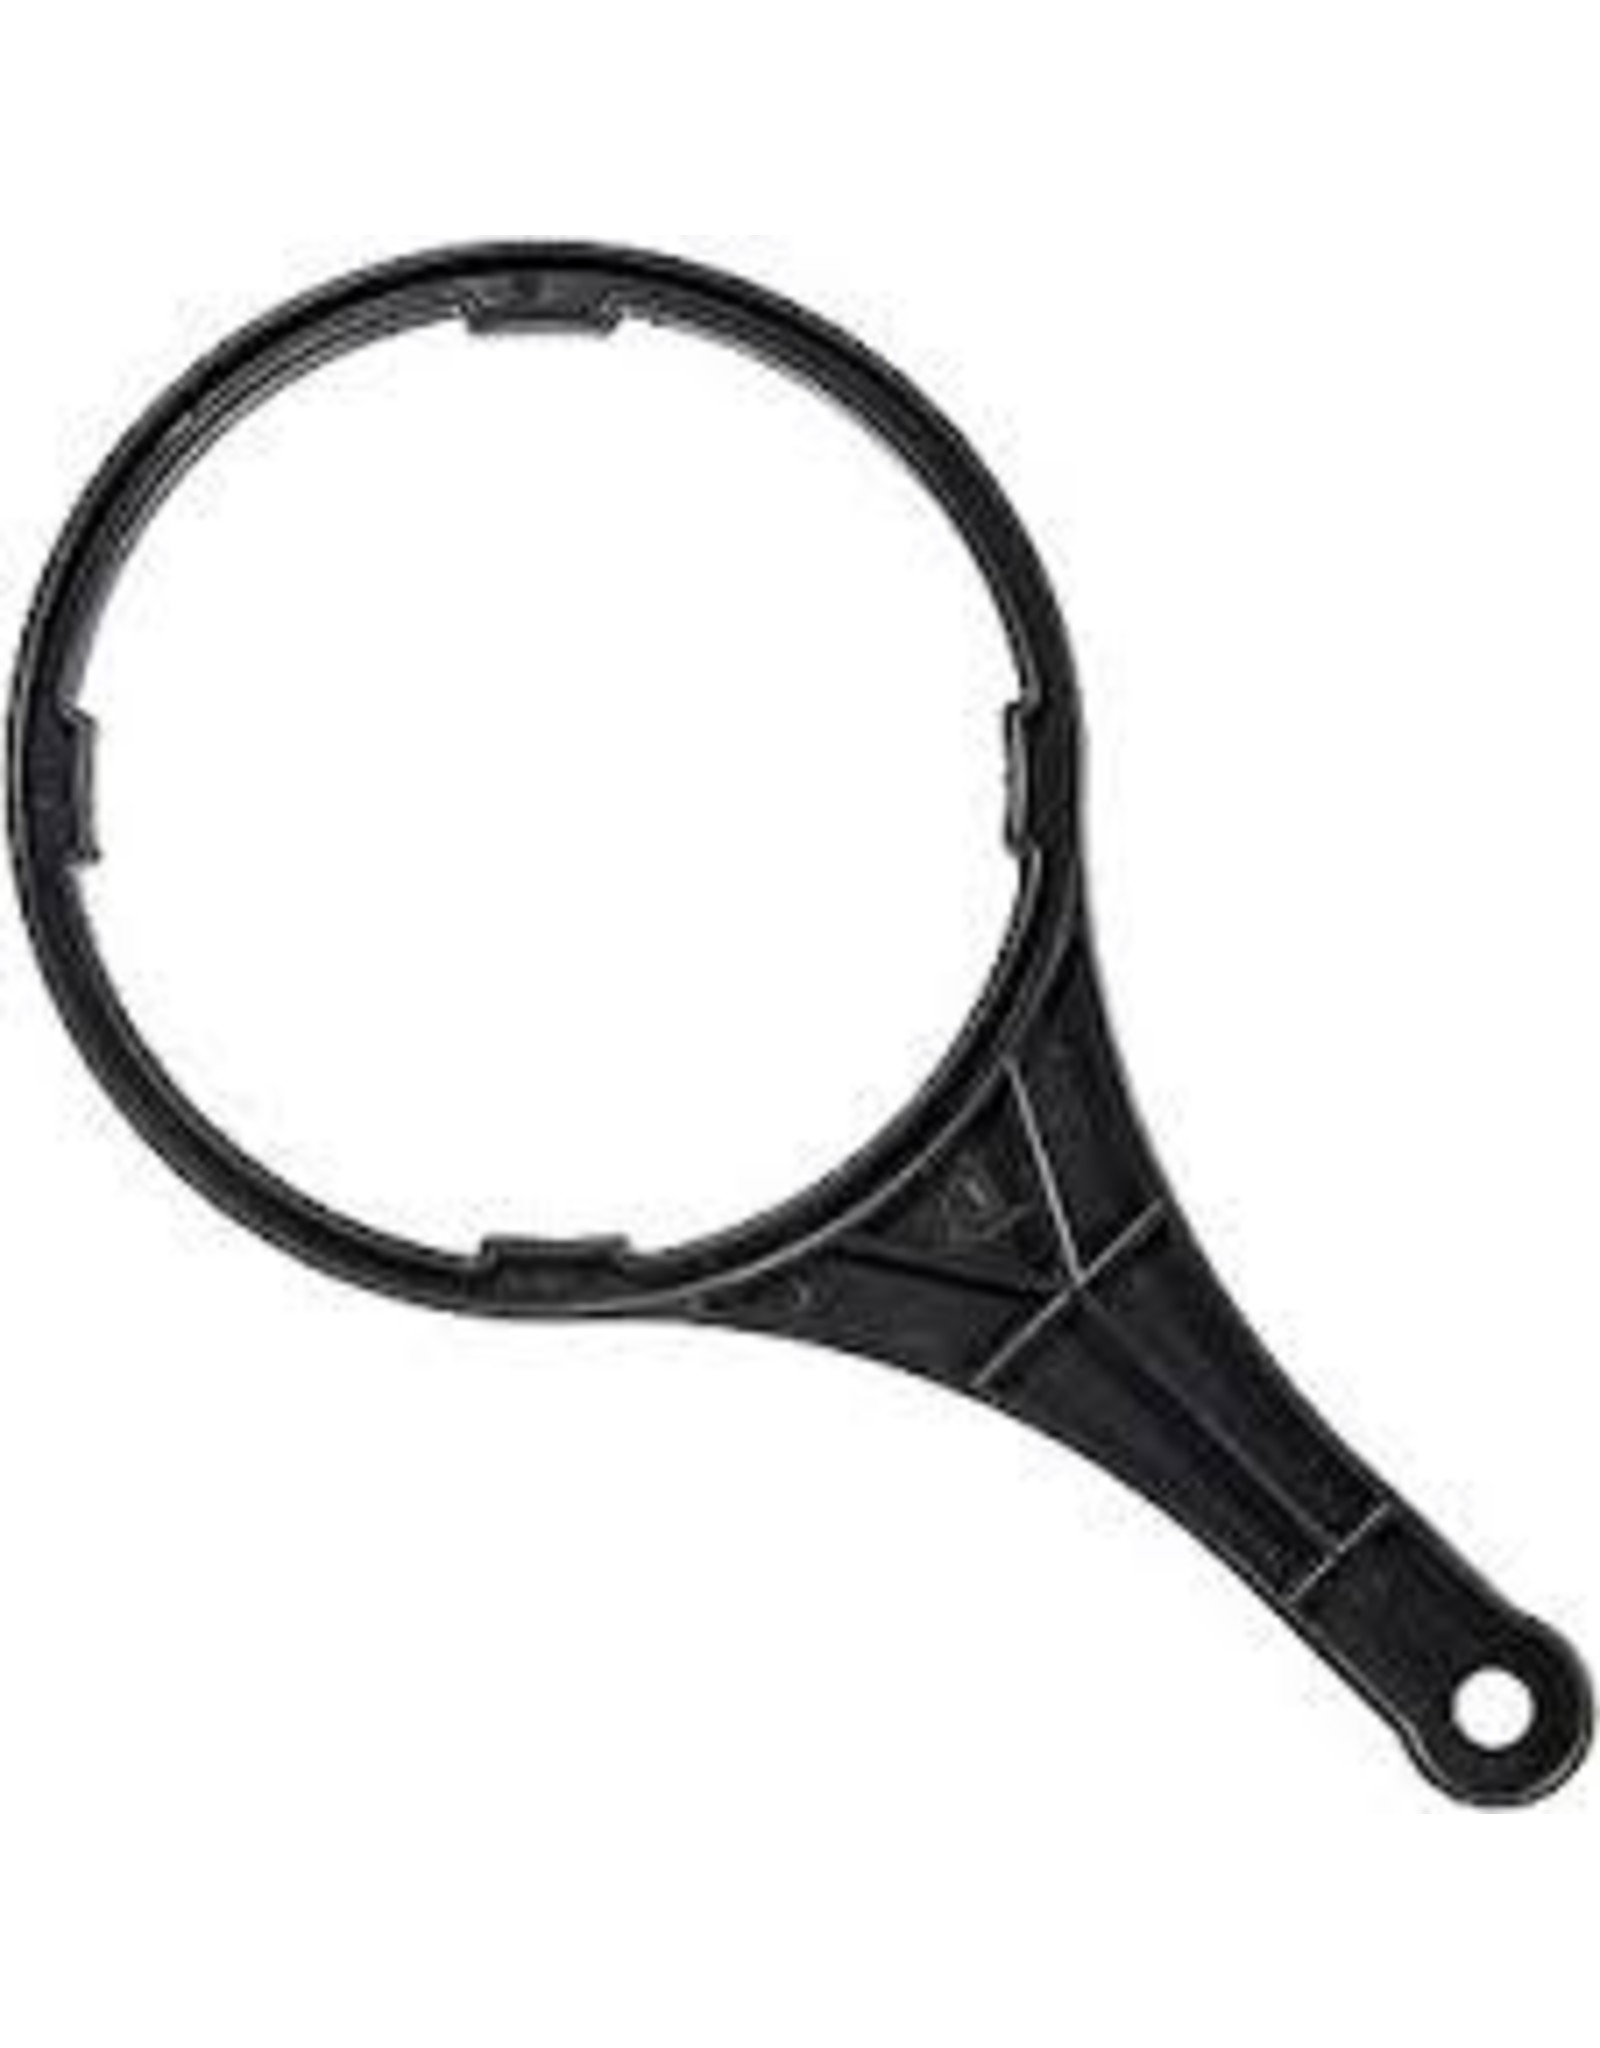 10" FILTER HOUSING WRENCH